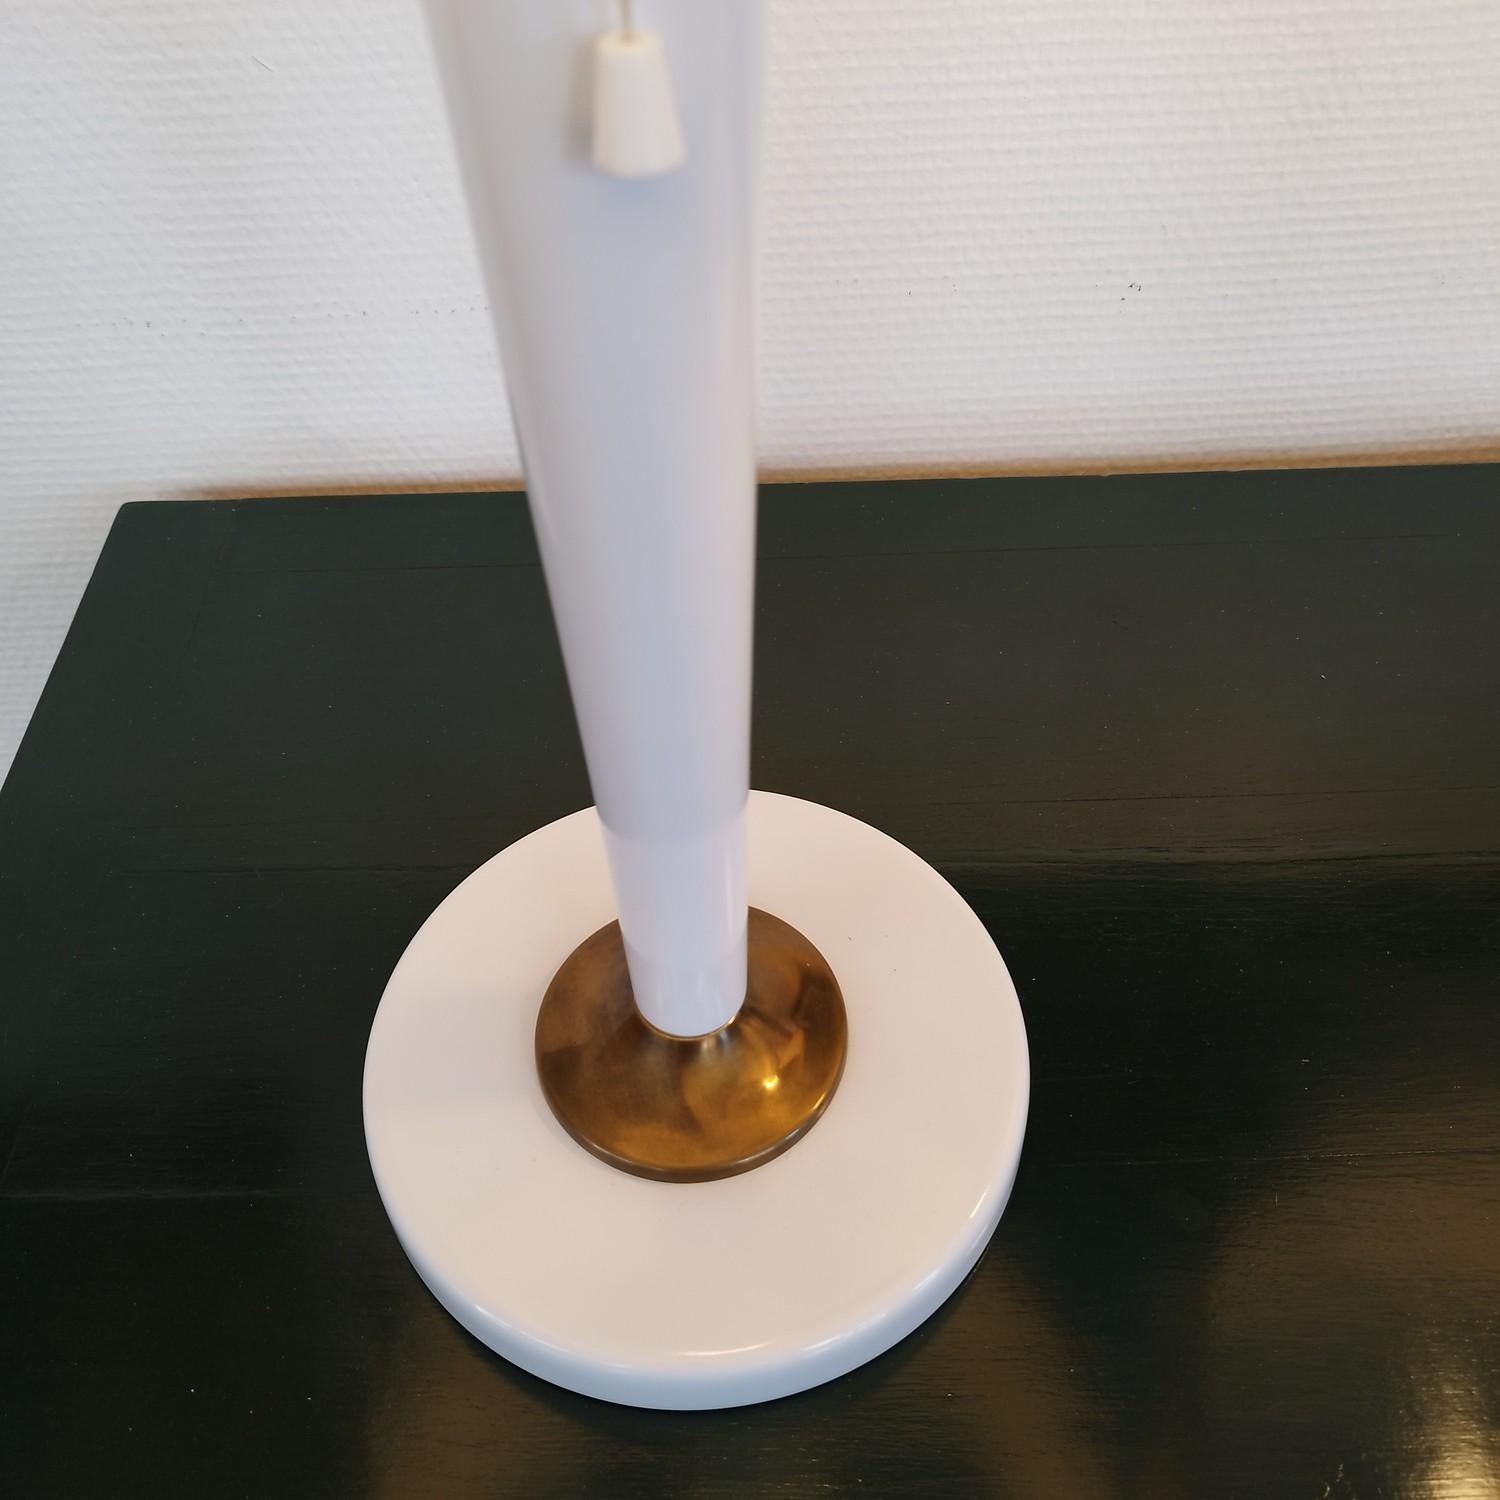 Lovely 1970s pair of white lacquered table lamp with brass accents. They've been recently lacquered with a good quality finish, the electricty has been verified, and their socket will work both in the US and in Europe. Their switch is a little piece